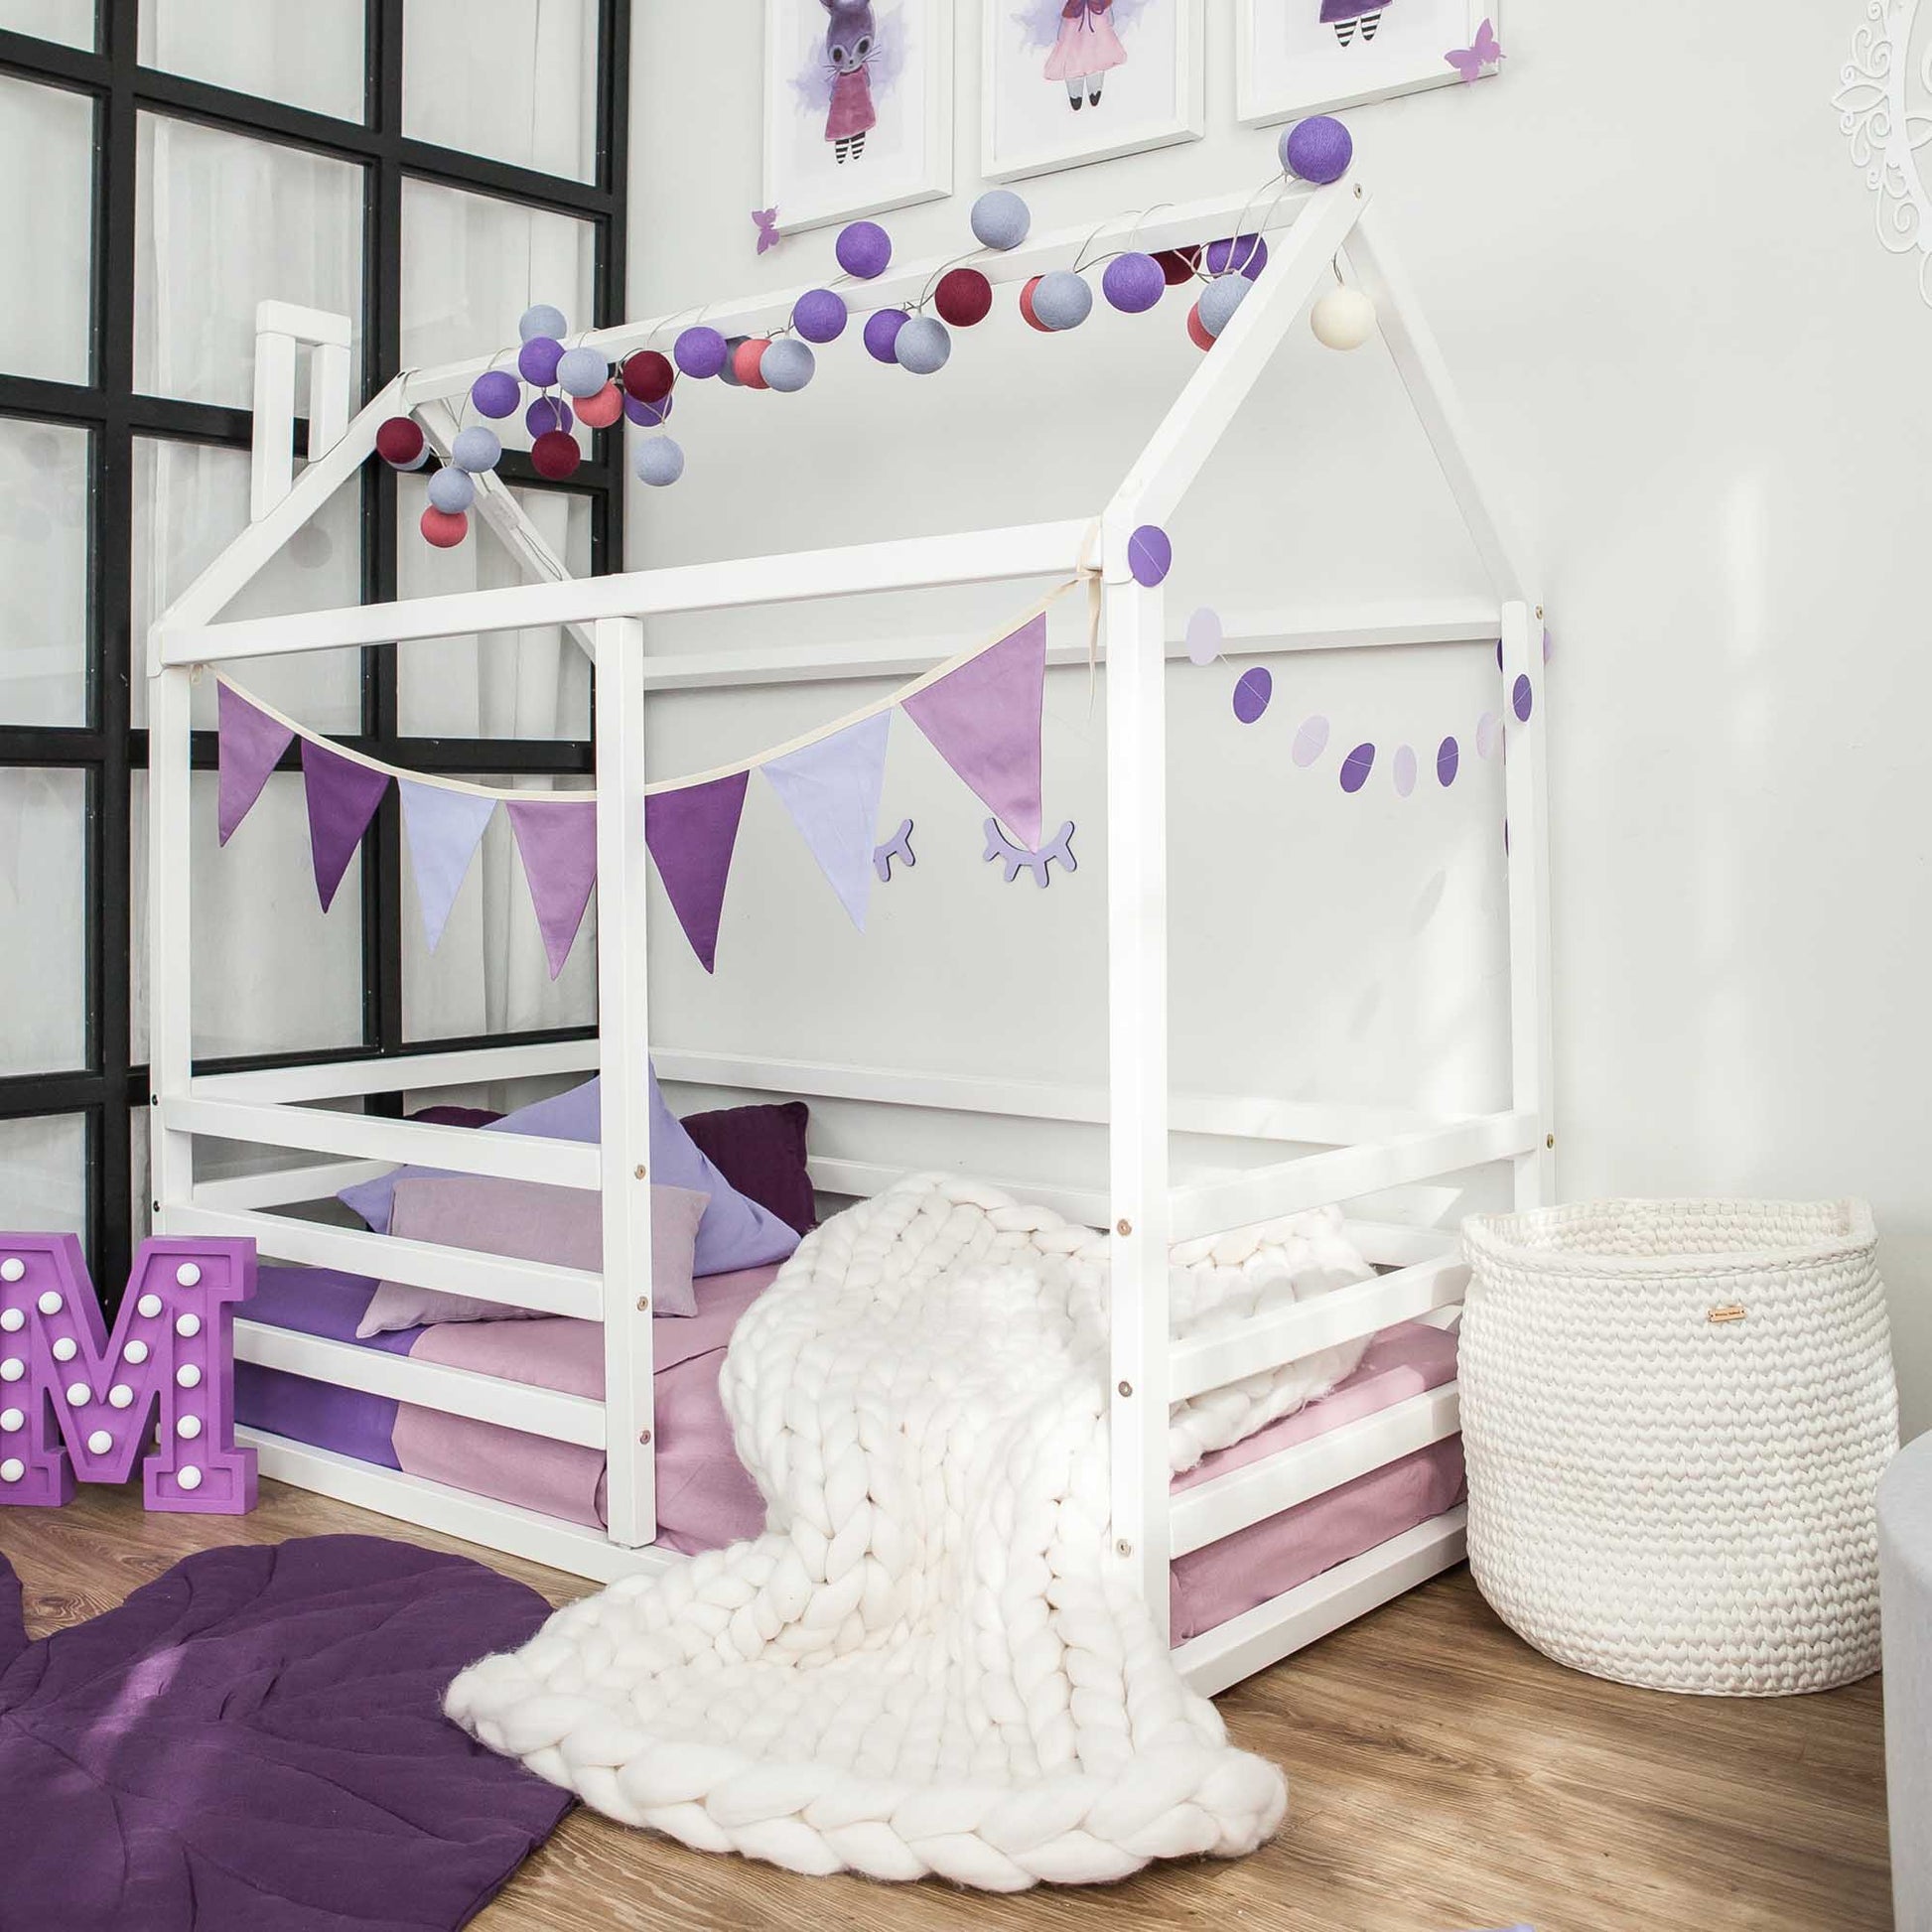 A child's bedroom with a floor level house bed with a horizontal fence for kids, adorned with purple and white decorations.